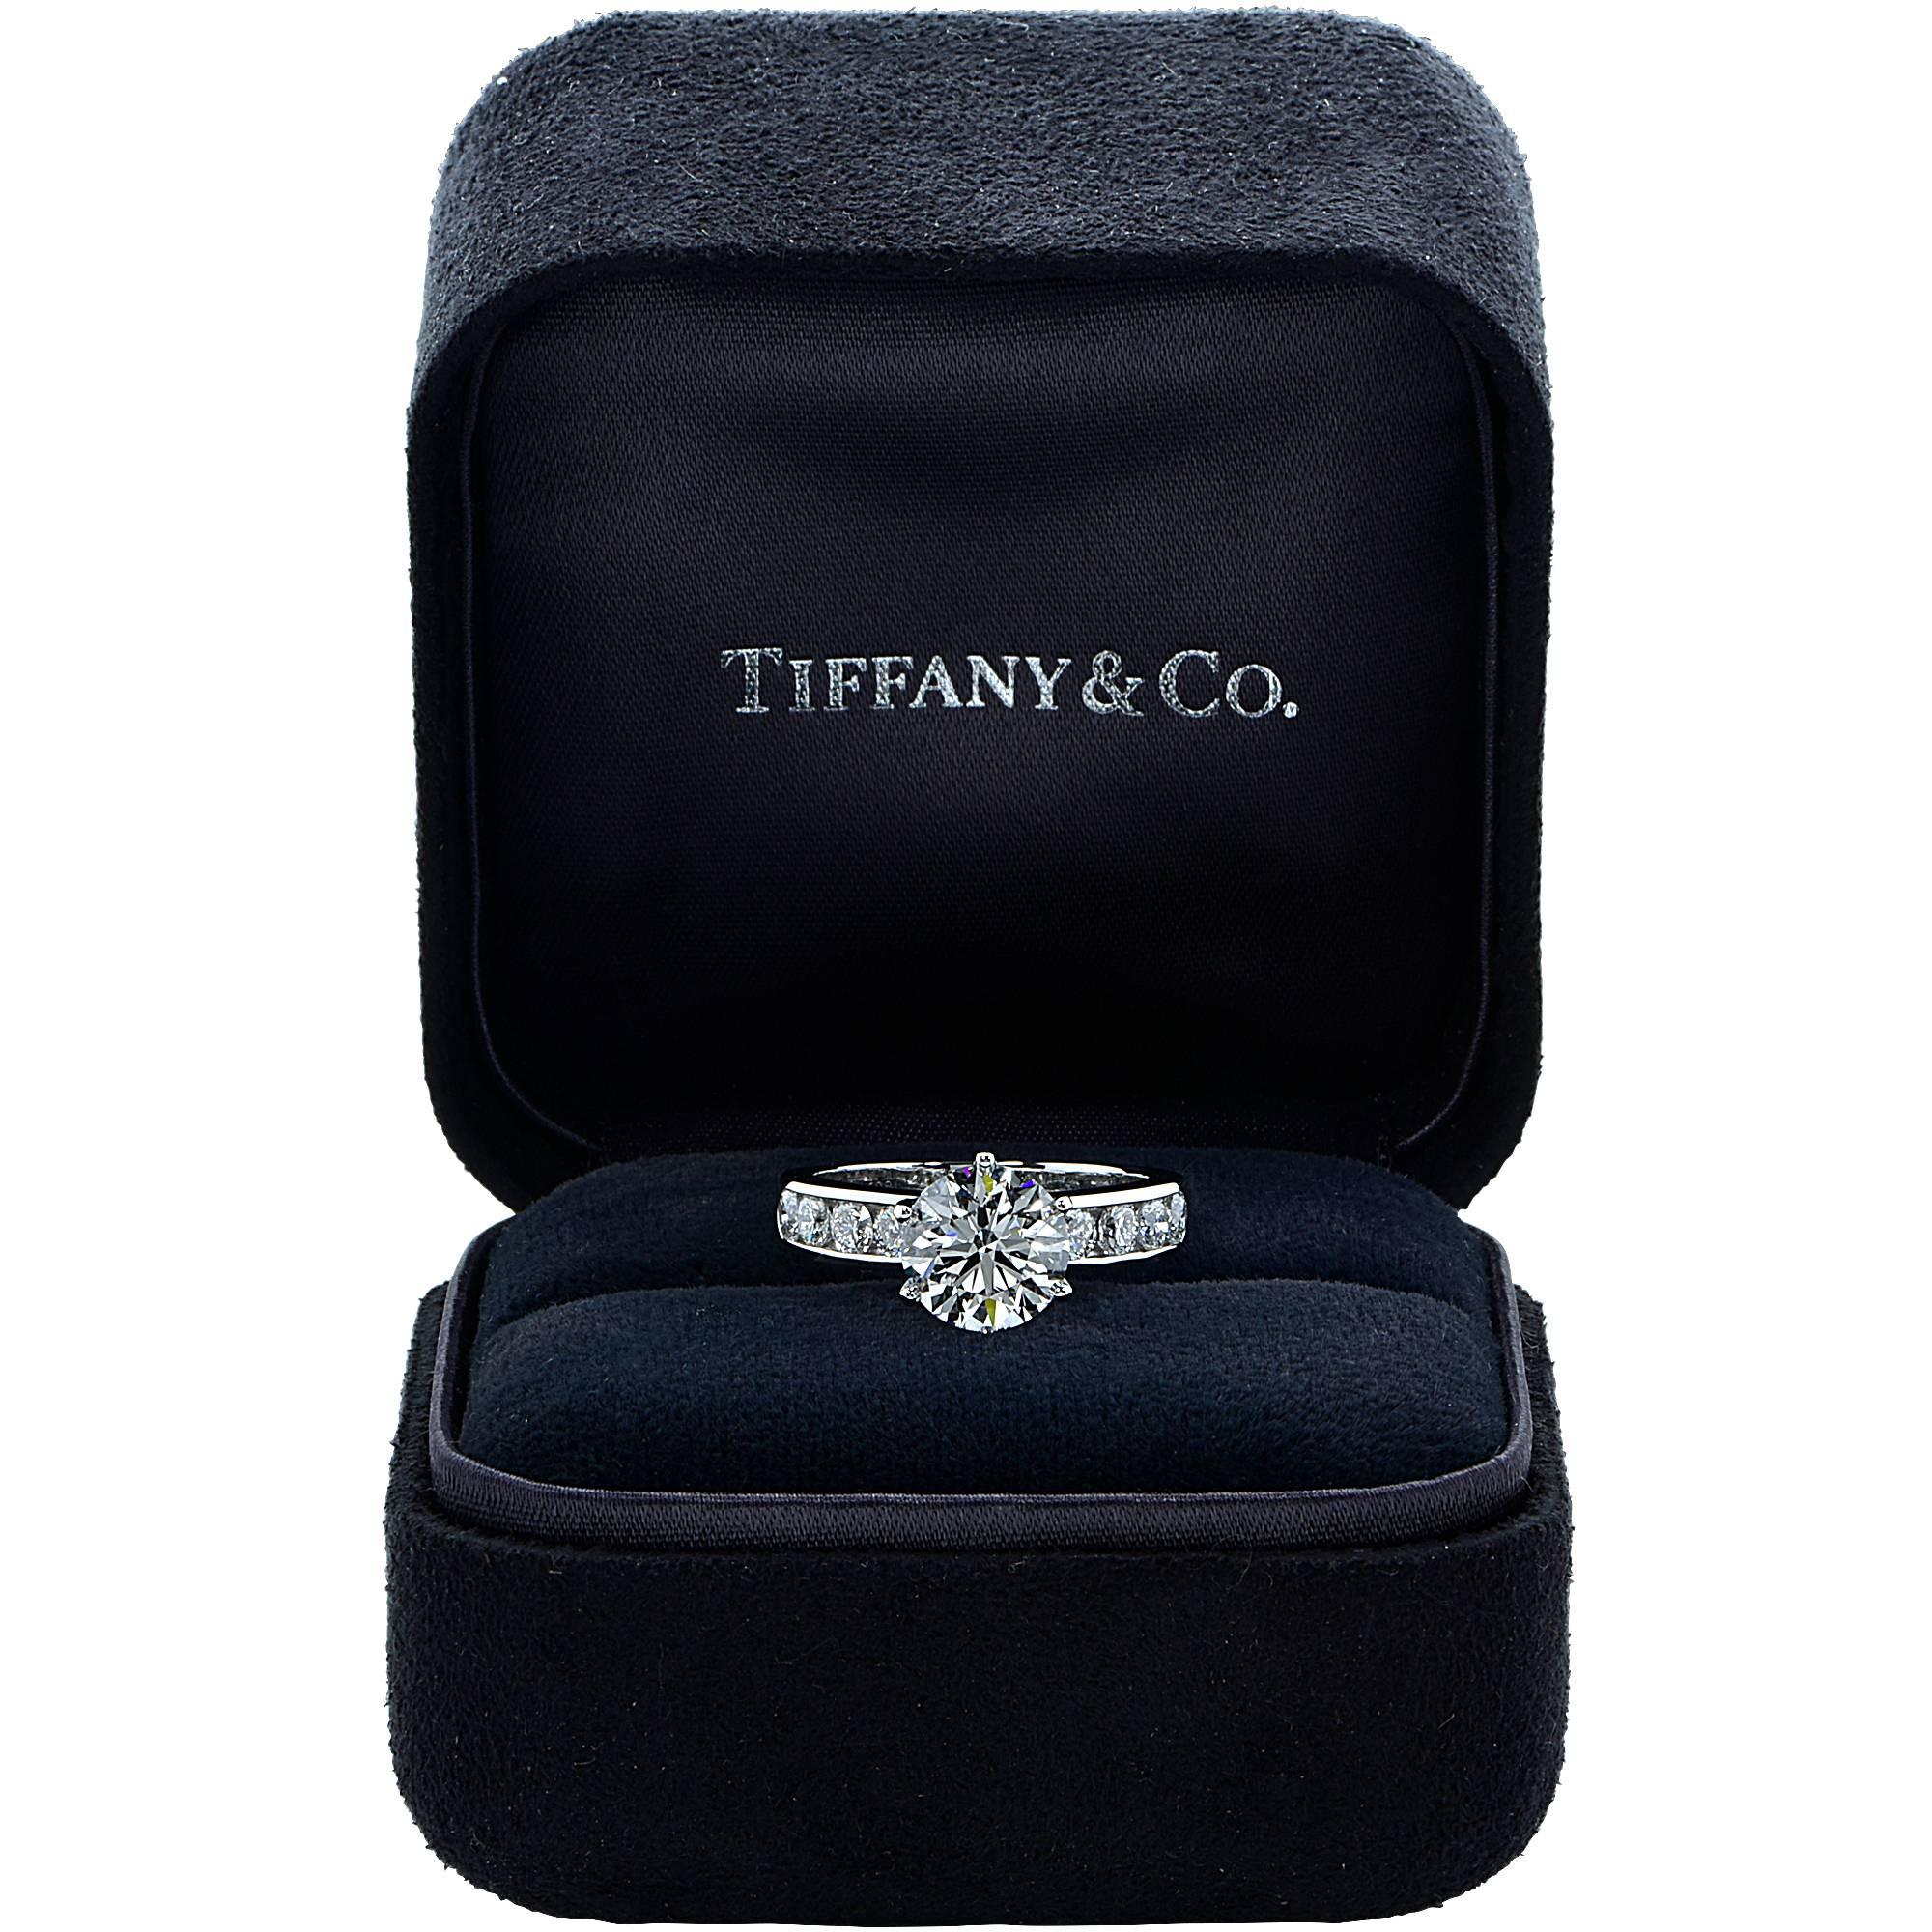 This beautiful platinum Tiffany & Co. ring features a 2.41ct round brilliant cut diamond H color VVS clarity with excellent polish, symmetry and polish. The center stone is laser inscribed with the Tiffany & Co diamond registration number.